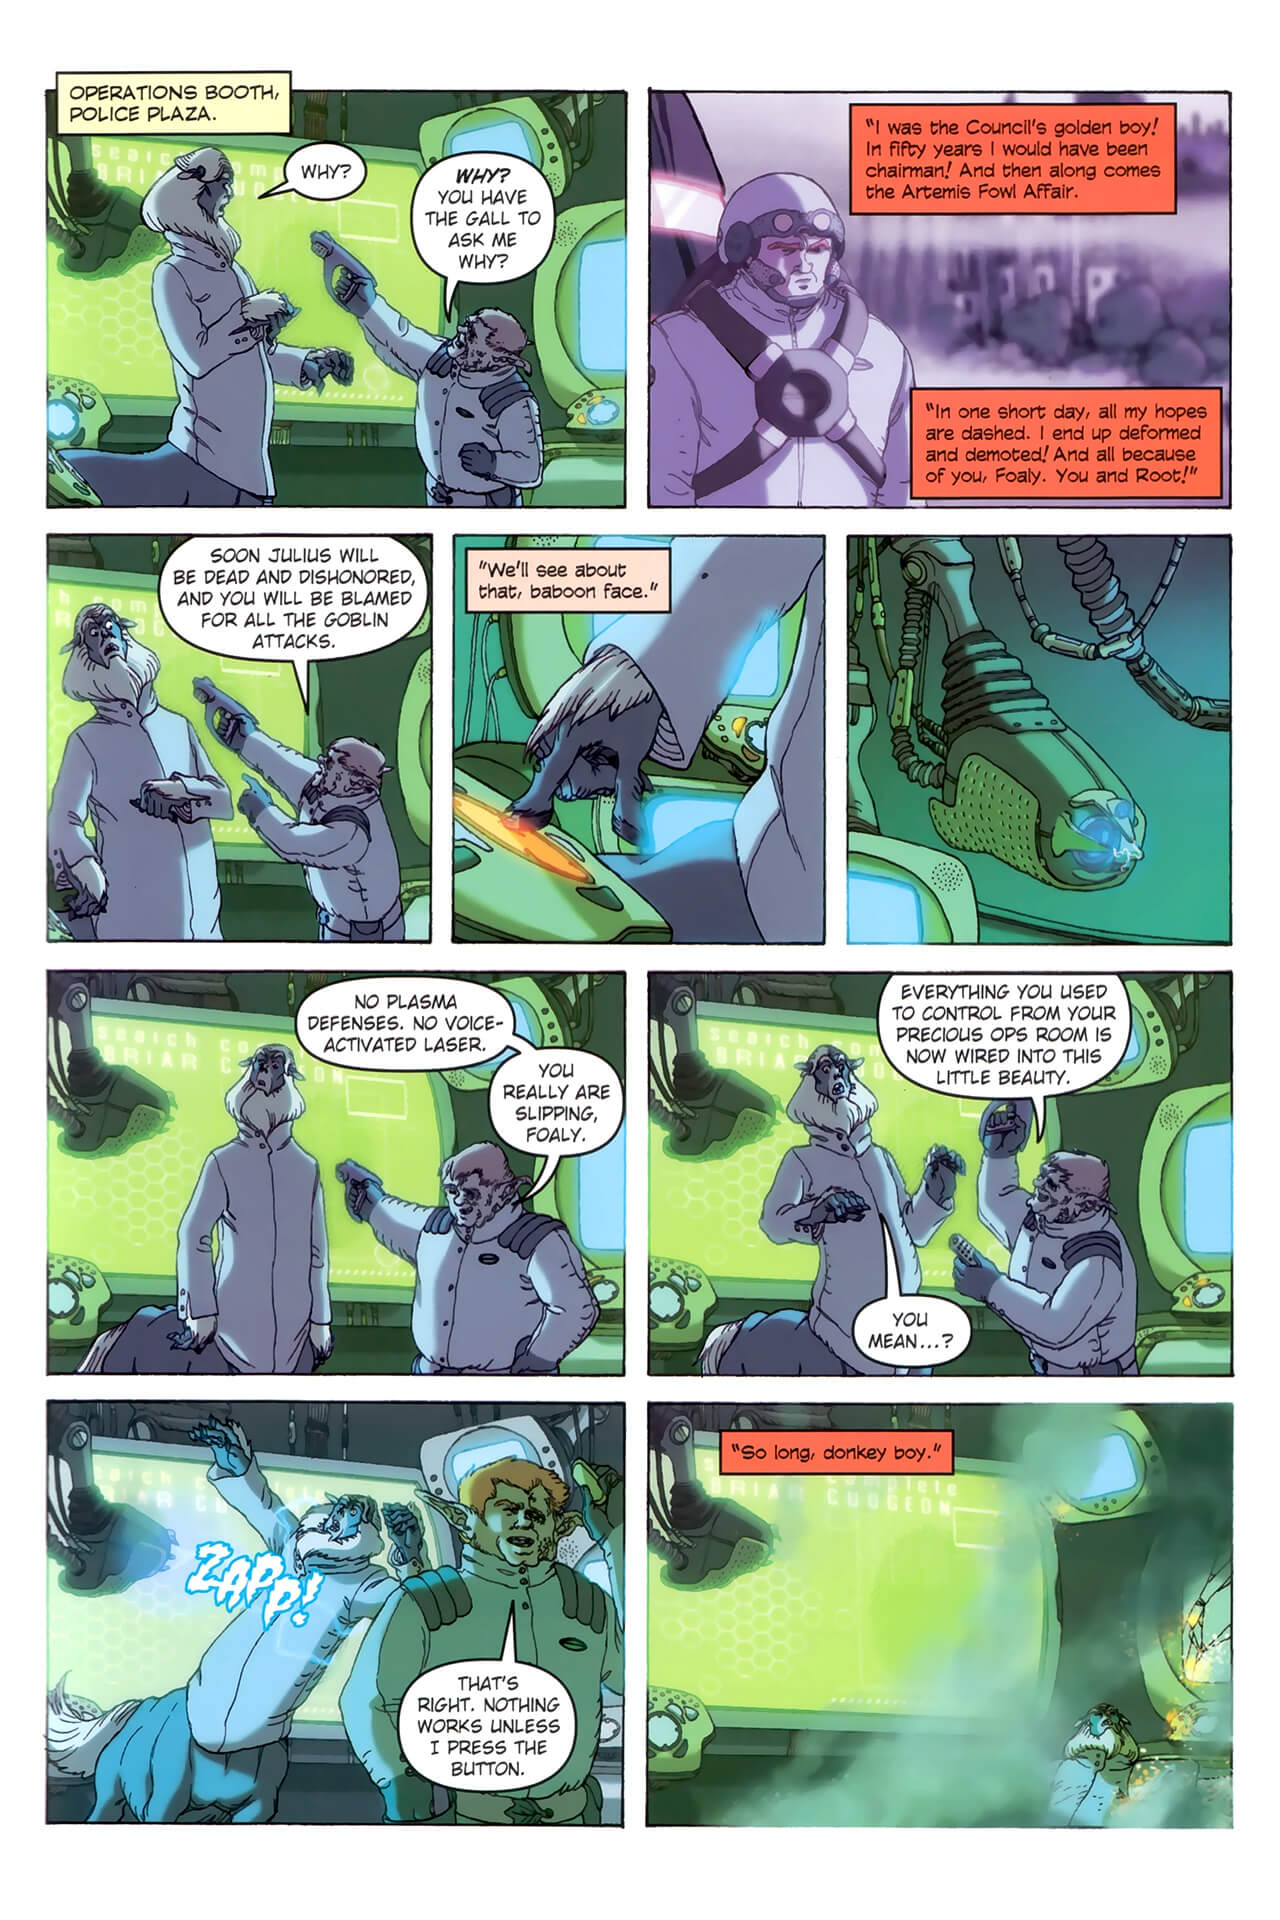 page 69 of artemis fowl the arctic incident graphic novel